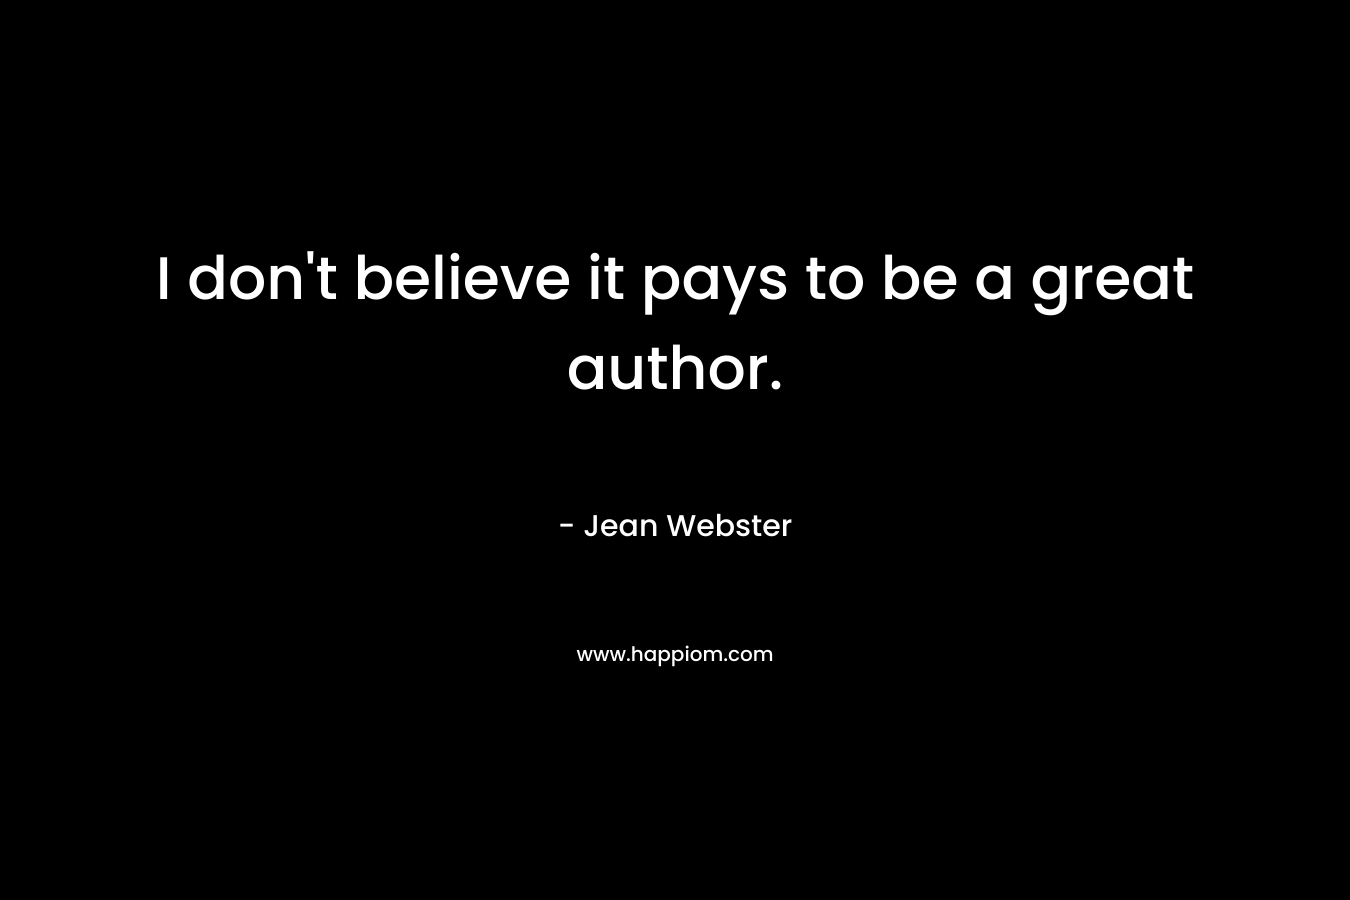 I don't believe it pays to be a great author.